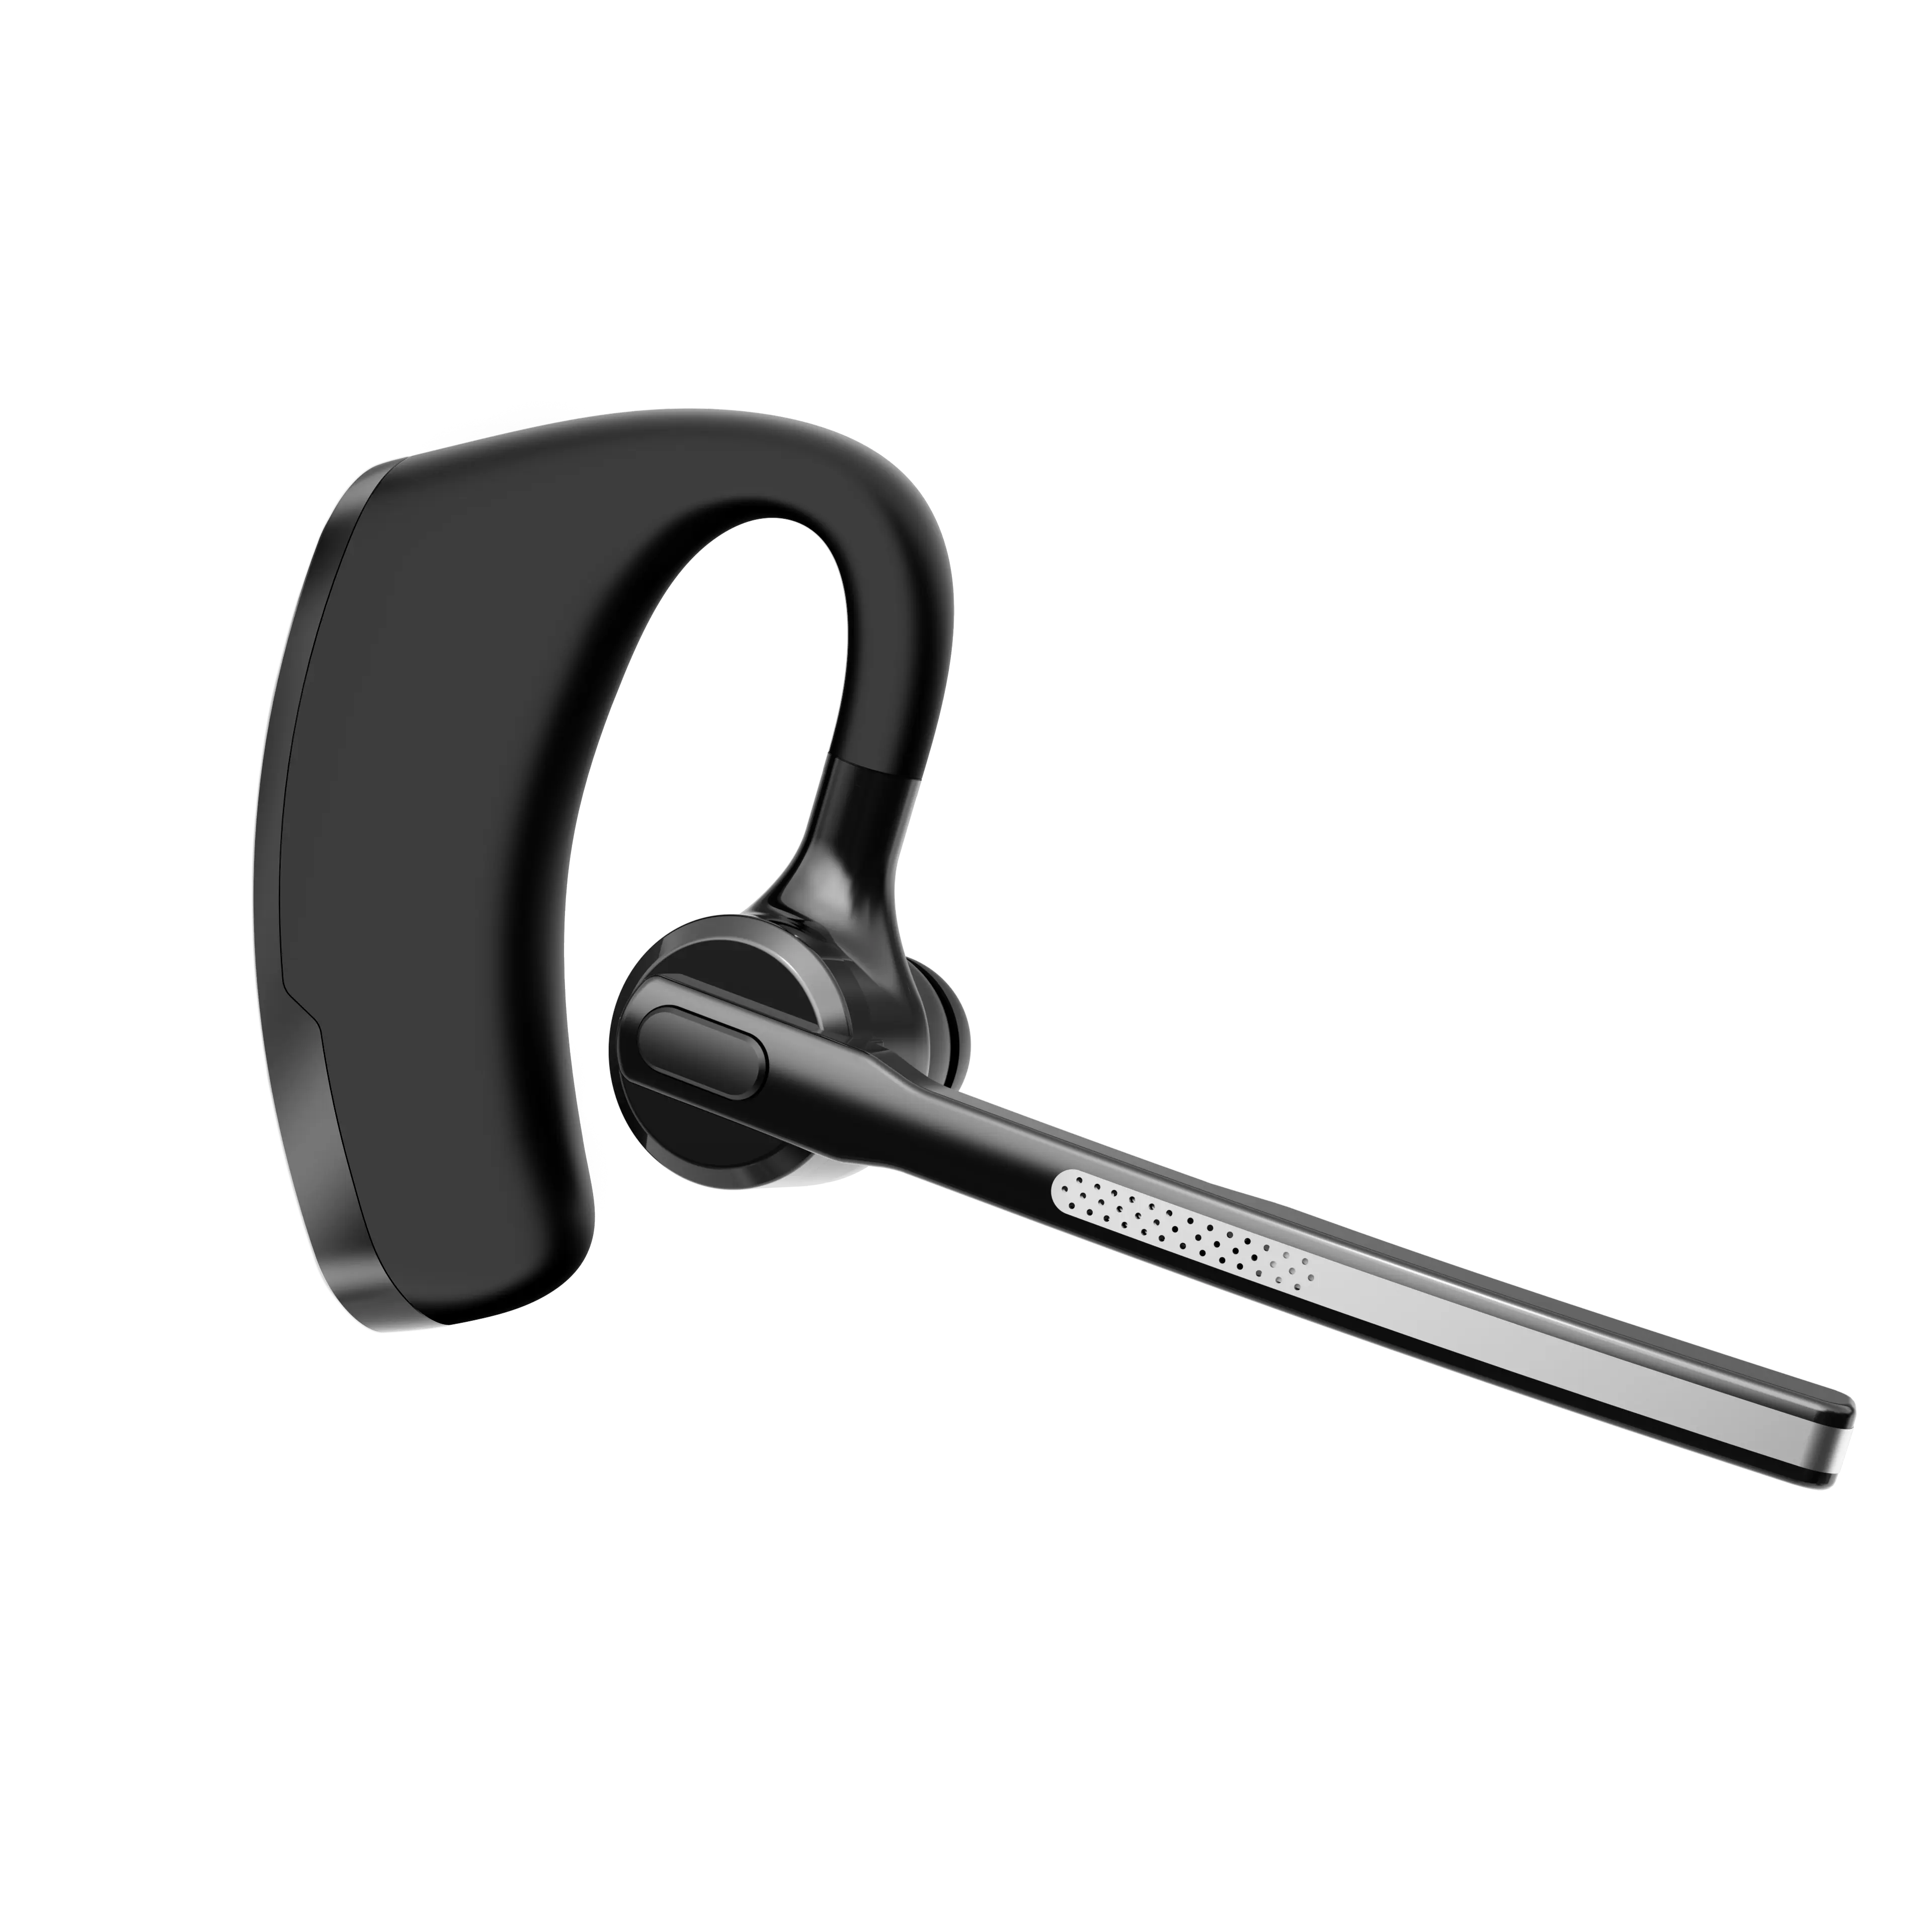 Wireless Headset, Dual-Mic Wireless Earphones Noise Cancelling Earpiece, Hands-Free Earphone Compatible with iPhone and Android